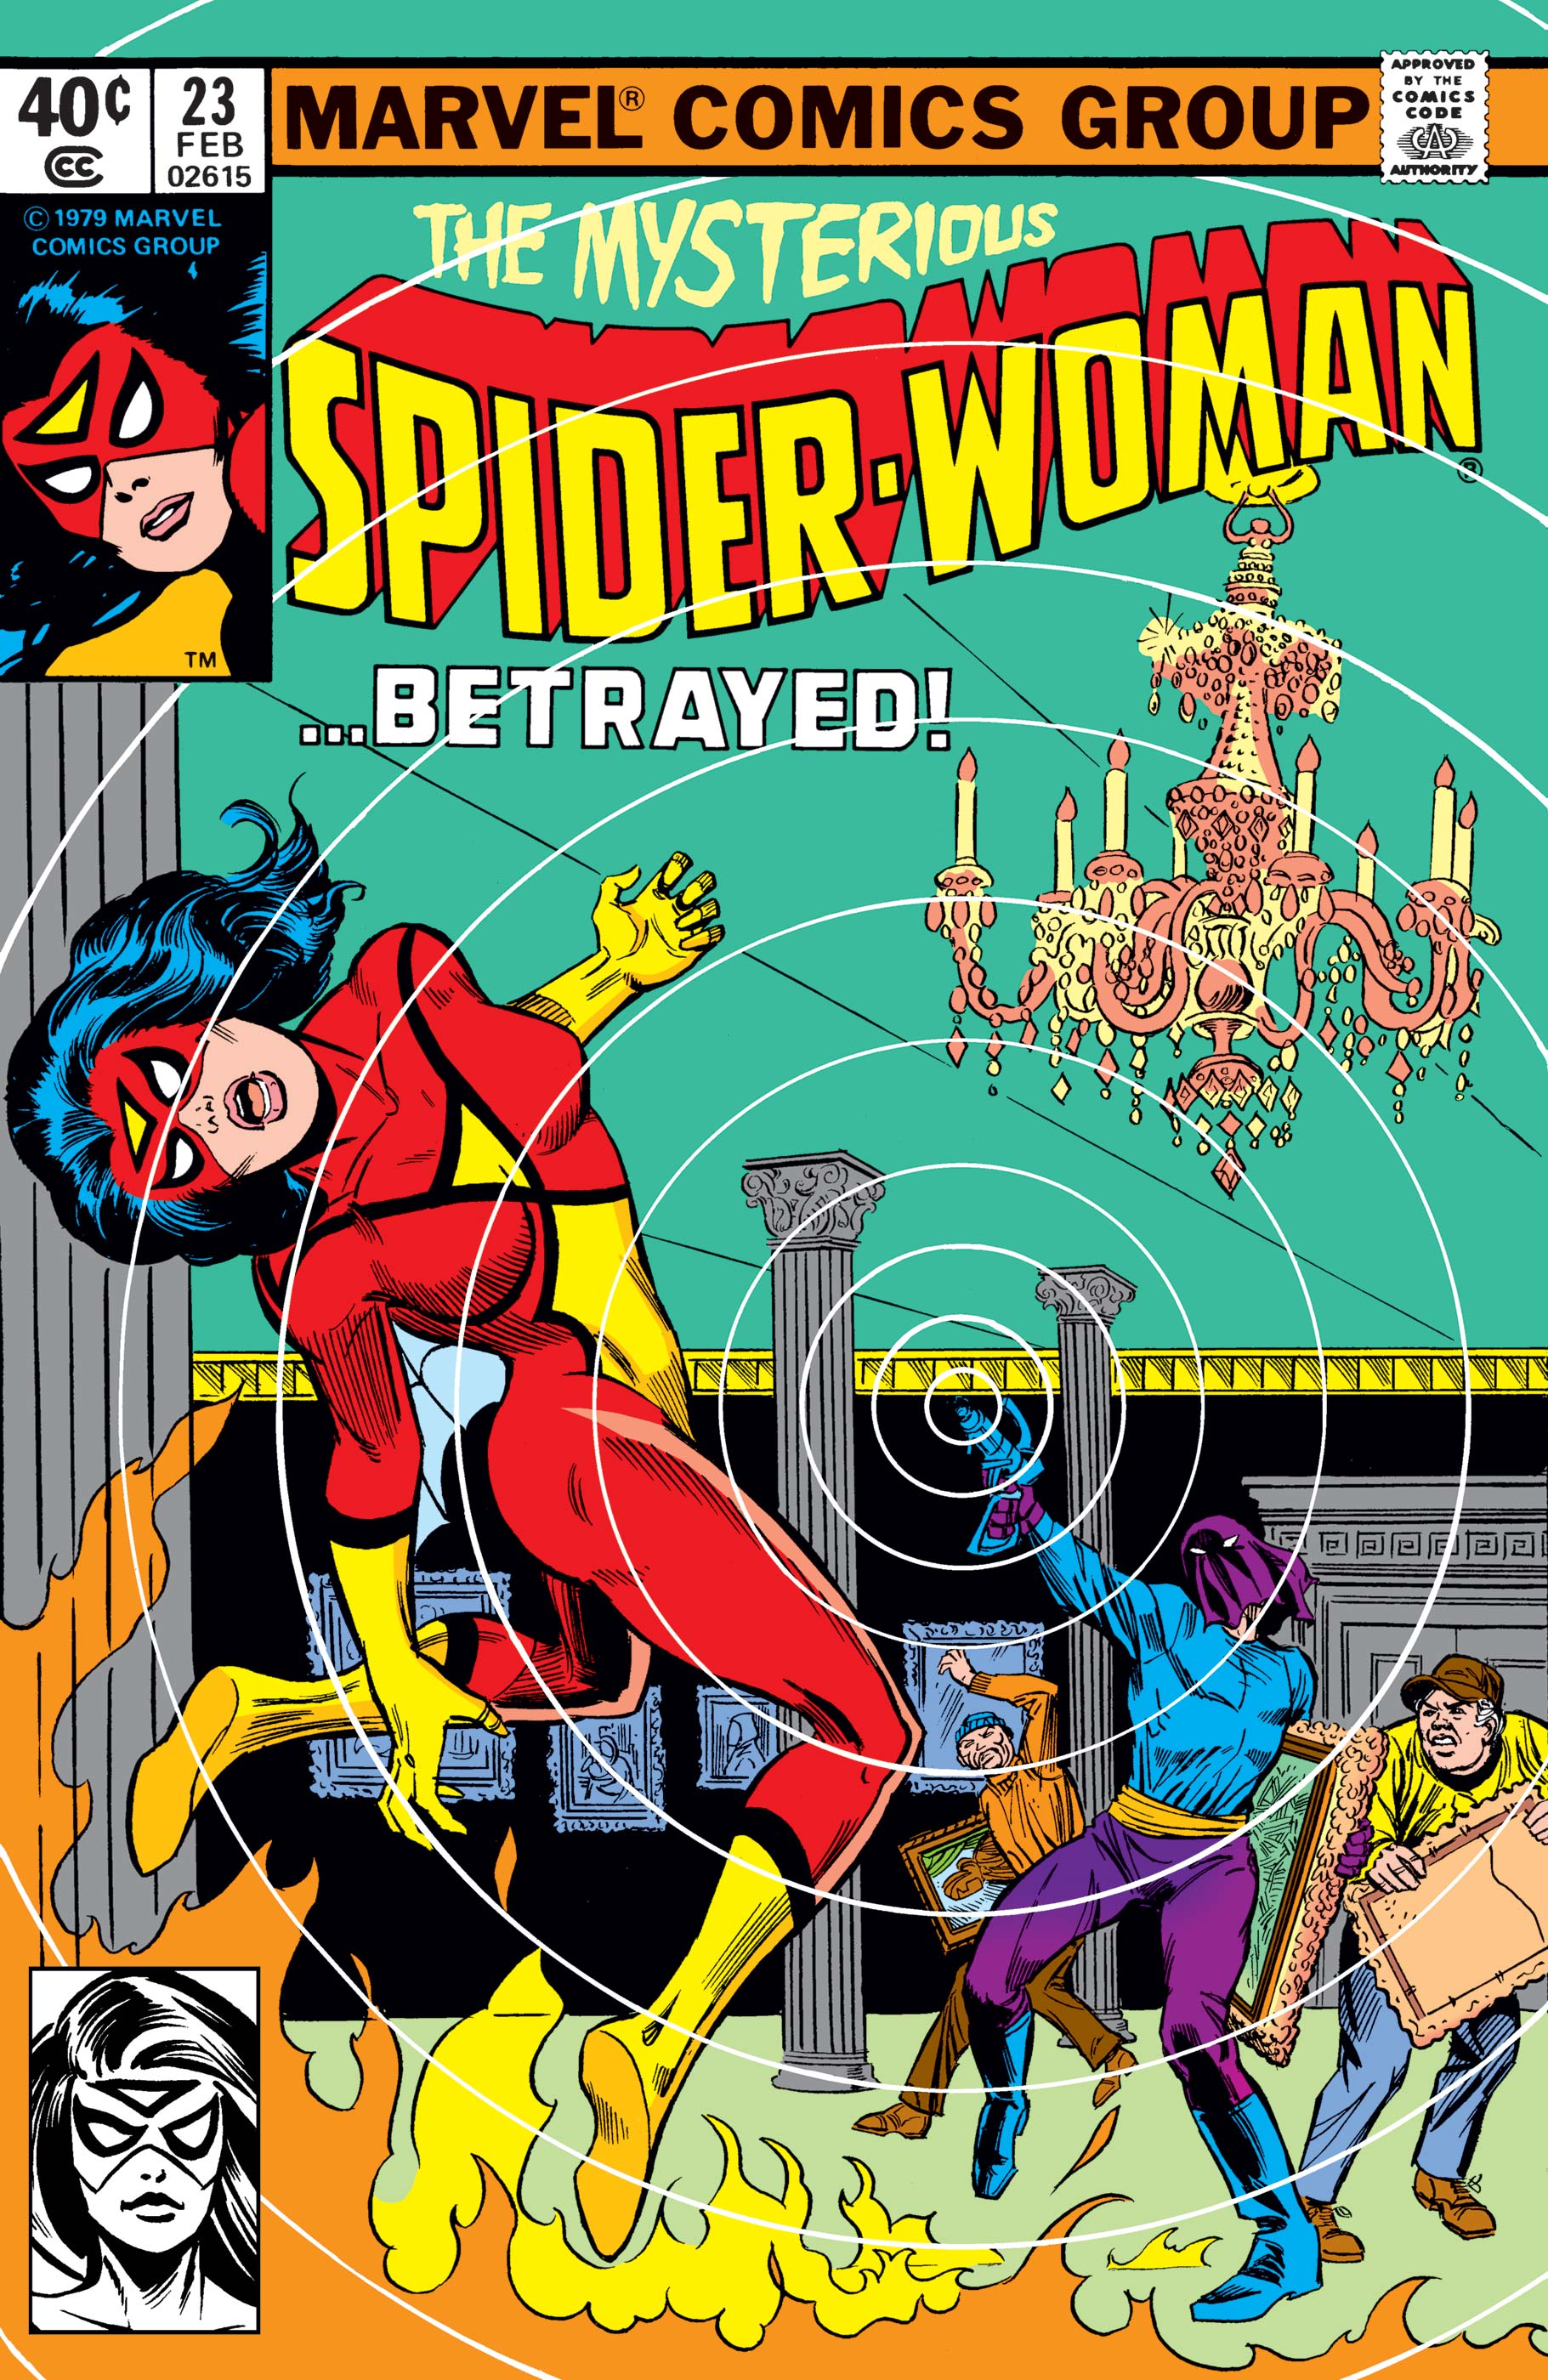 Spider-Woman (1978) #23 | Comic Issues | Marvel